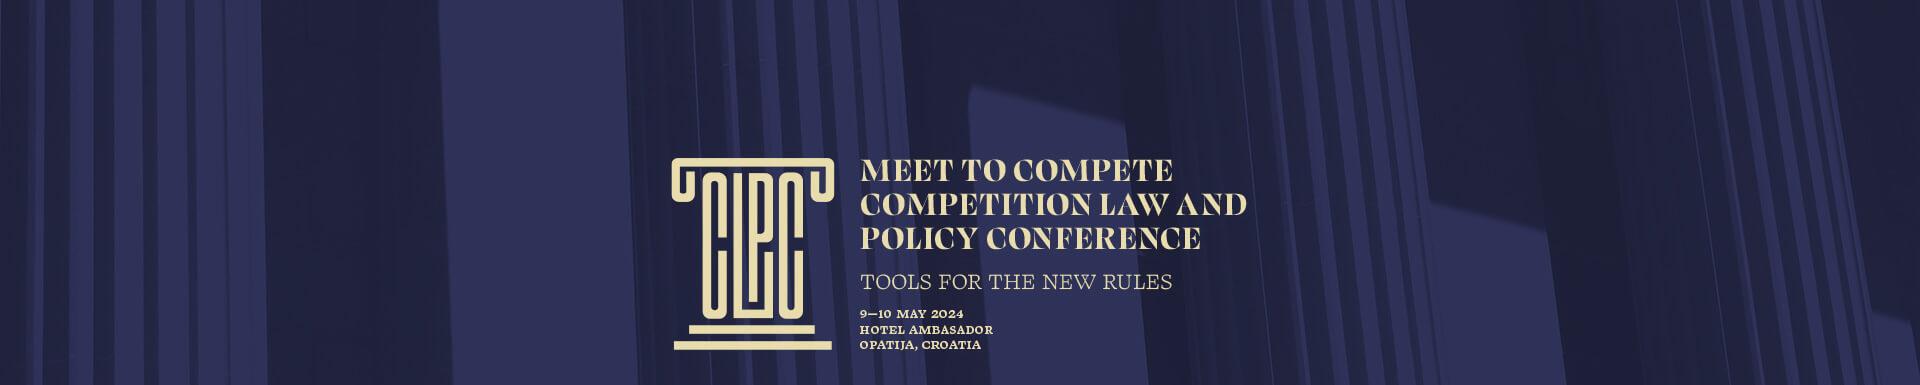  НАЈАВА КОНФЕРЕЦИЈЕ   MEET TO COMPETE  COMPETITION LAW AND POLICY CONFERENCE   “TOOLS FOR THE NEW RULES“